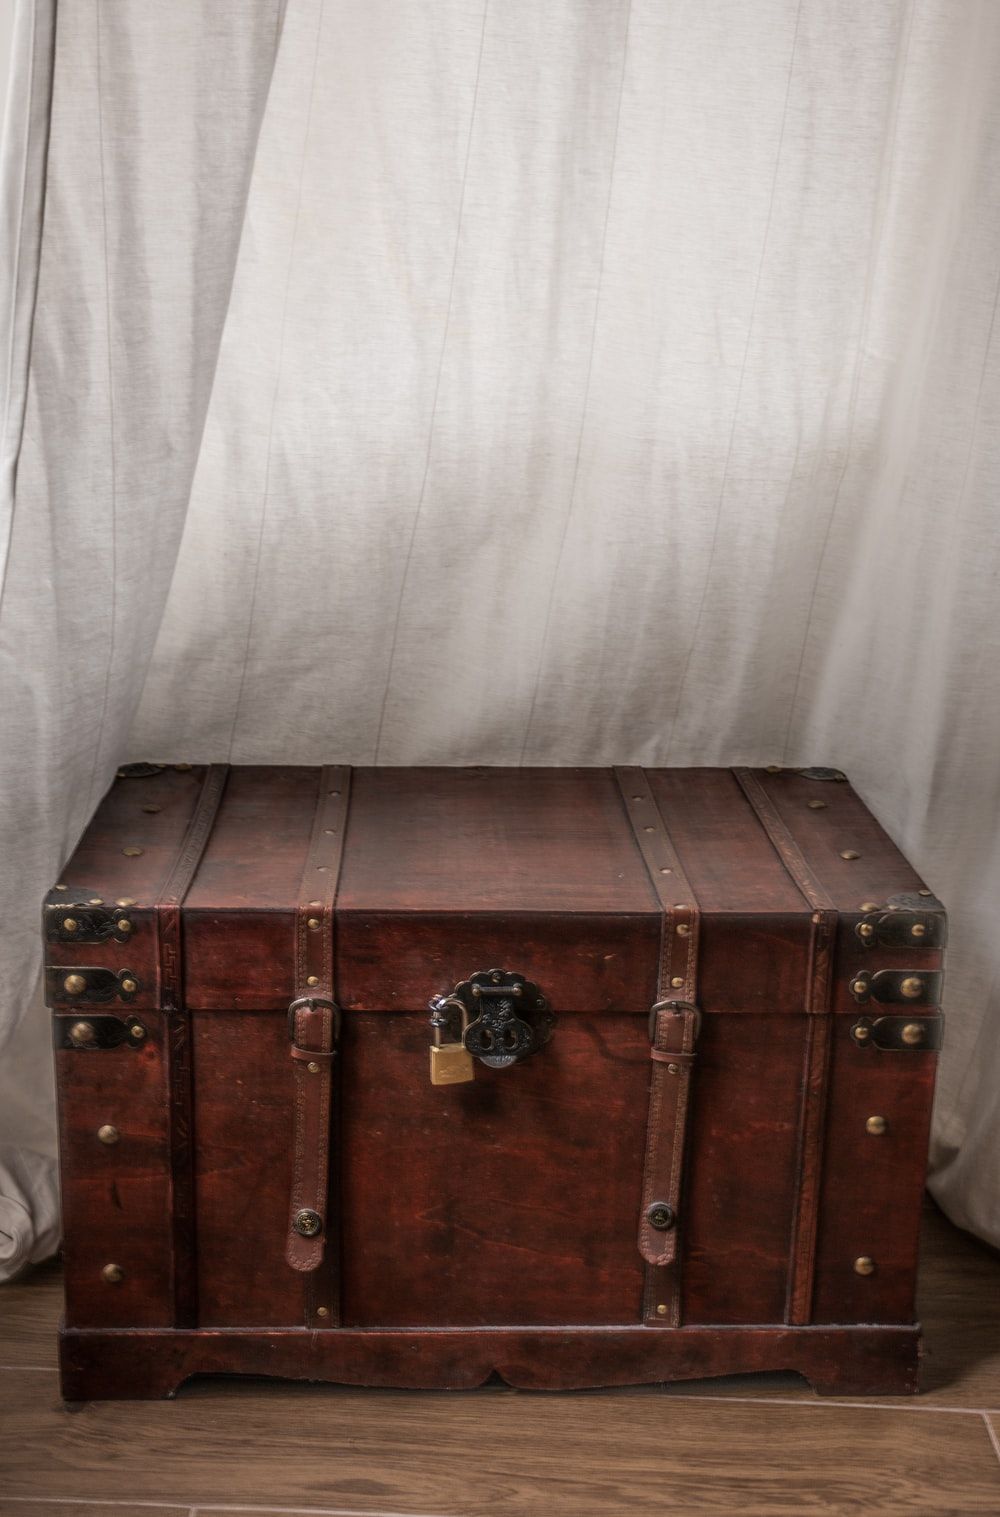 Treasure Chest Picture. Download Free Image